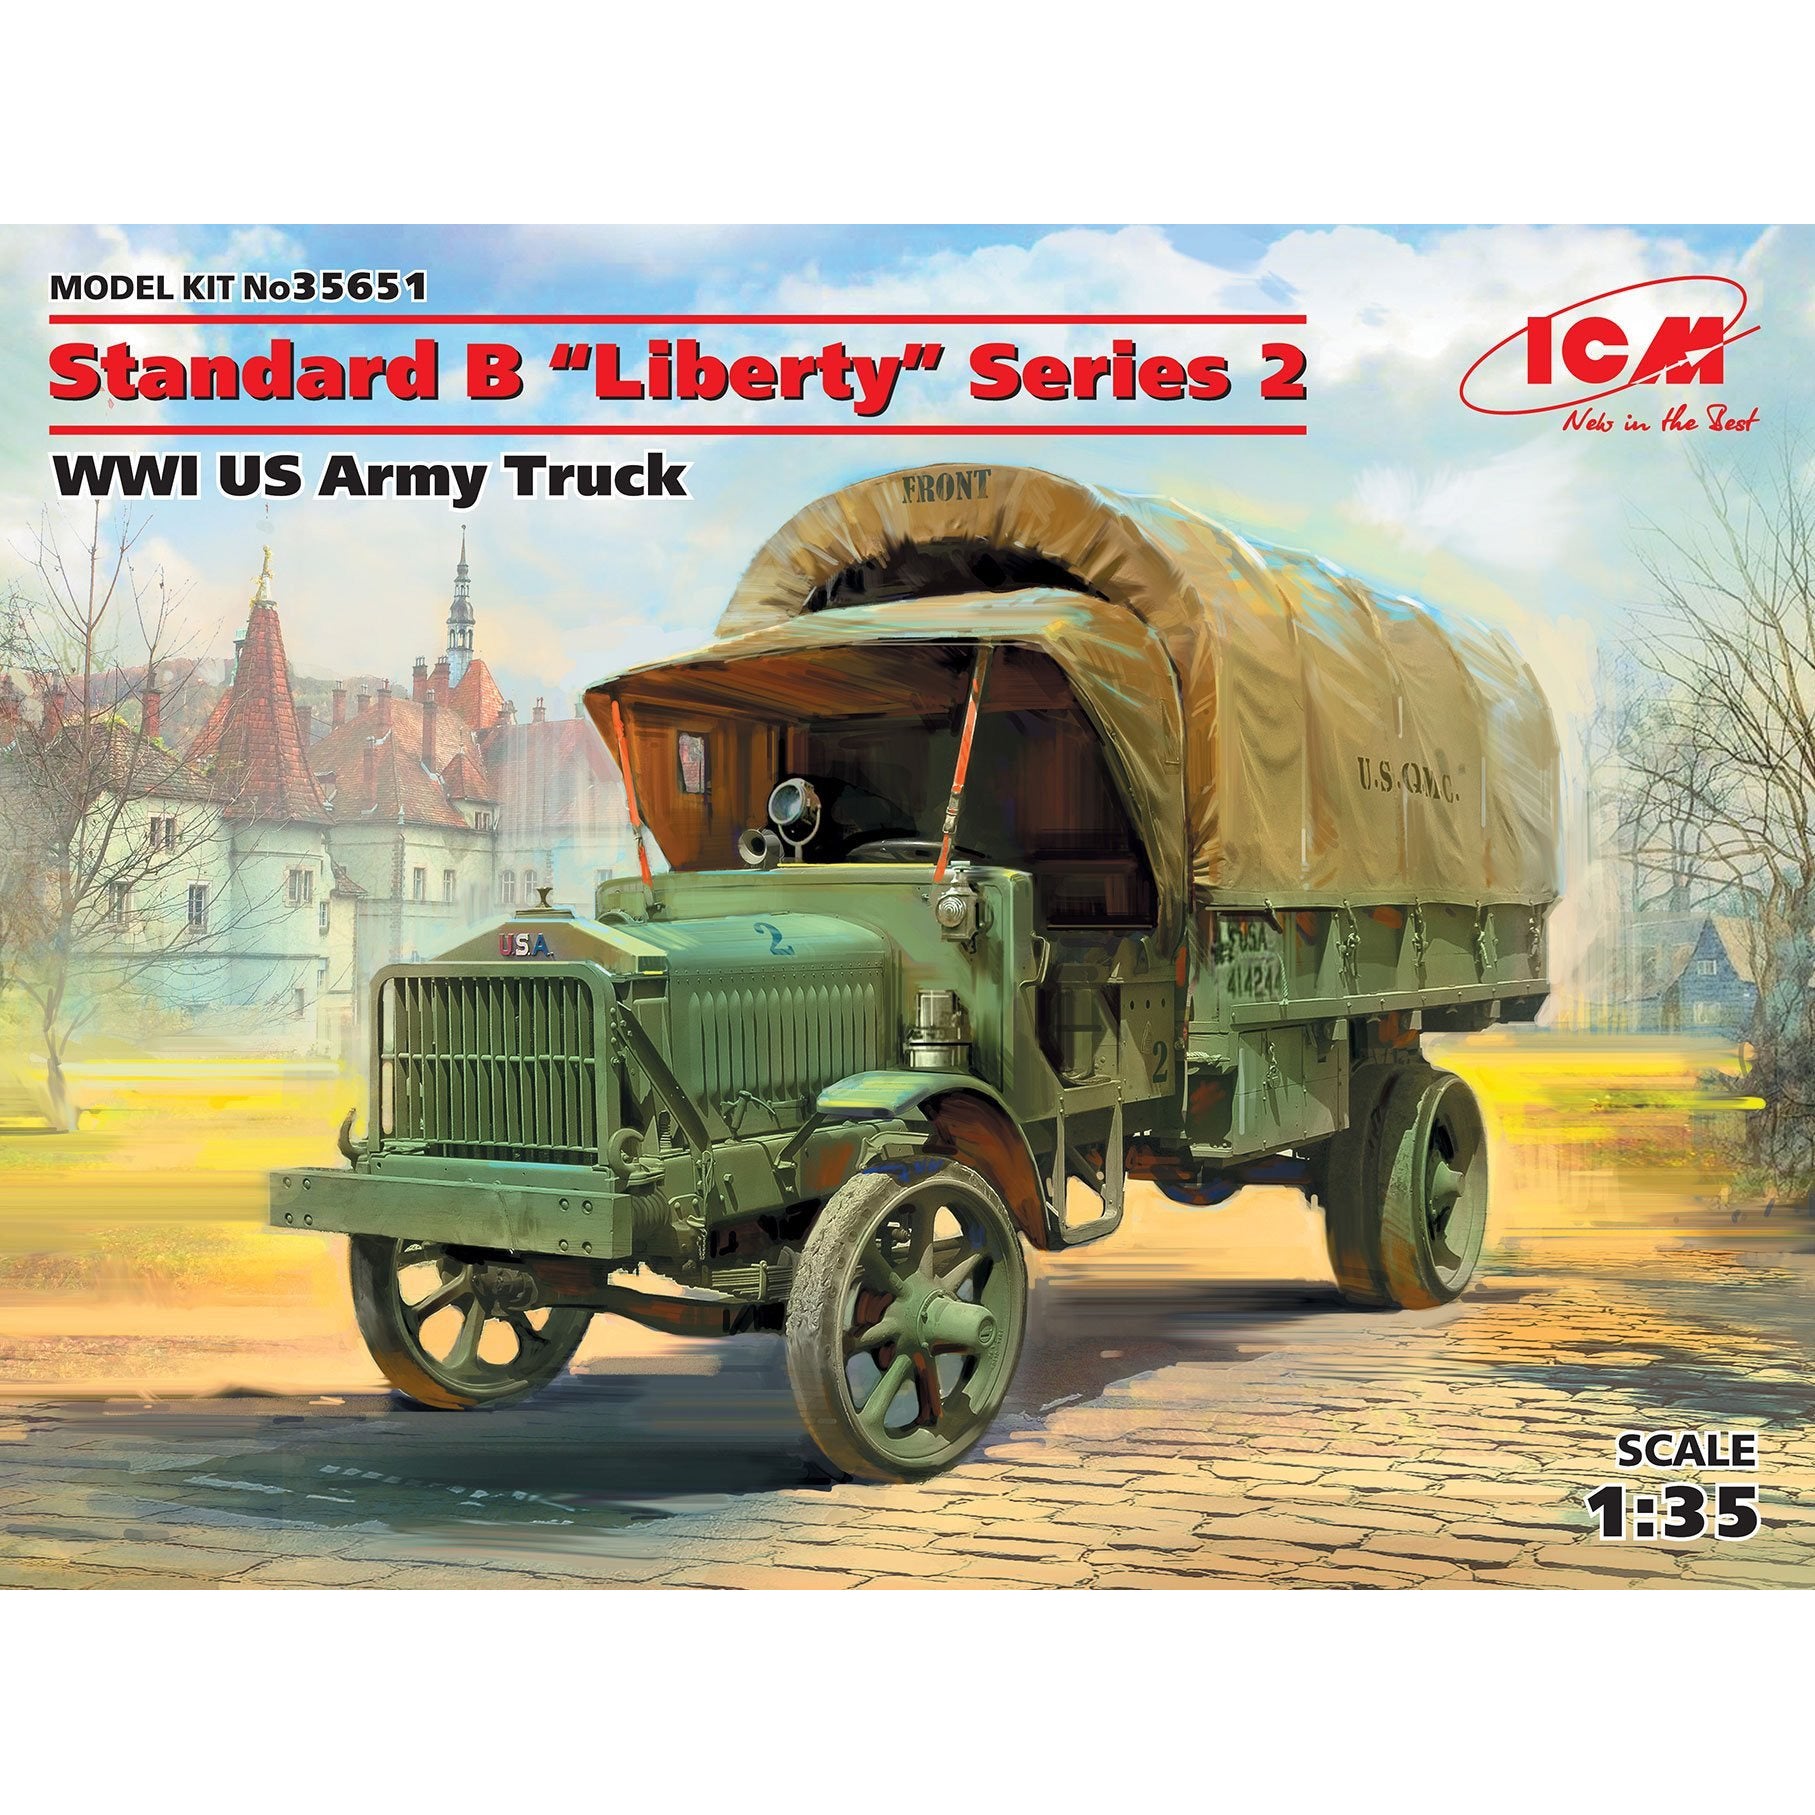 Standard B "Liberty" Series 2 US Army Truck (WWI) 1/35 by ICM